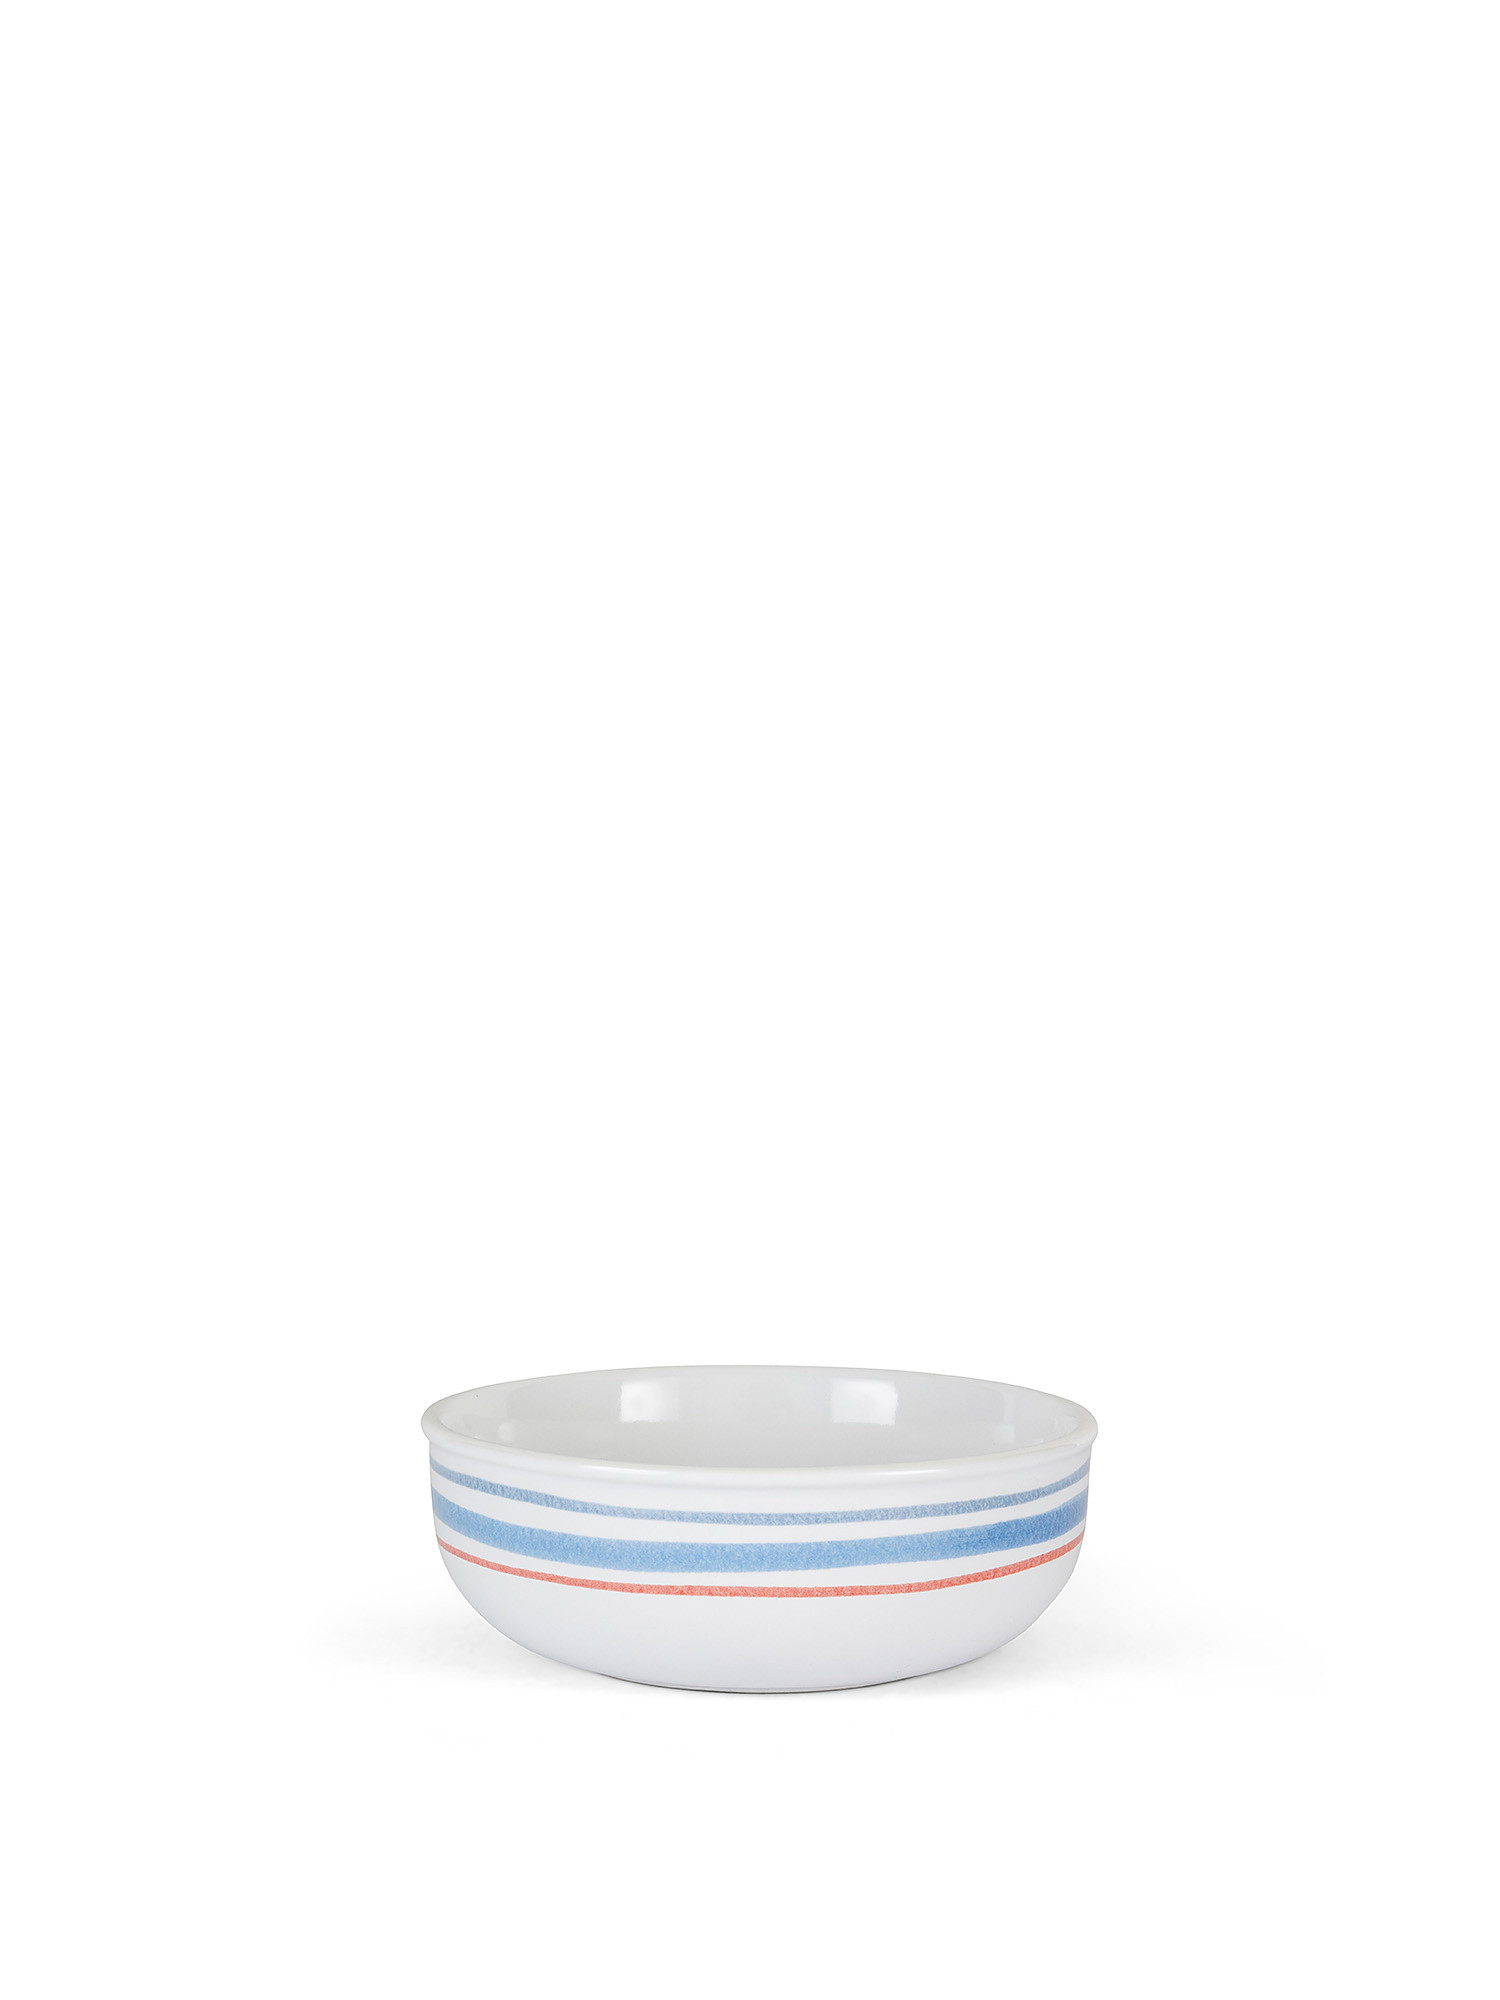 Ceramic bowl with lines decoration, White, large image number 0